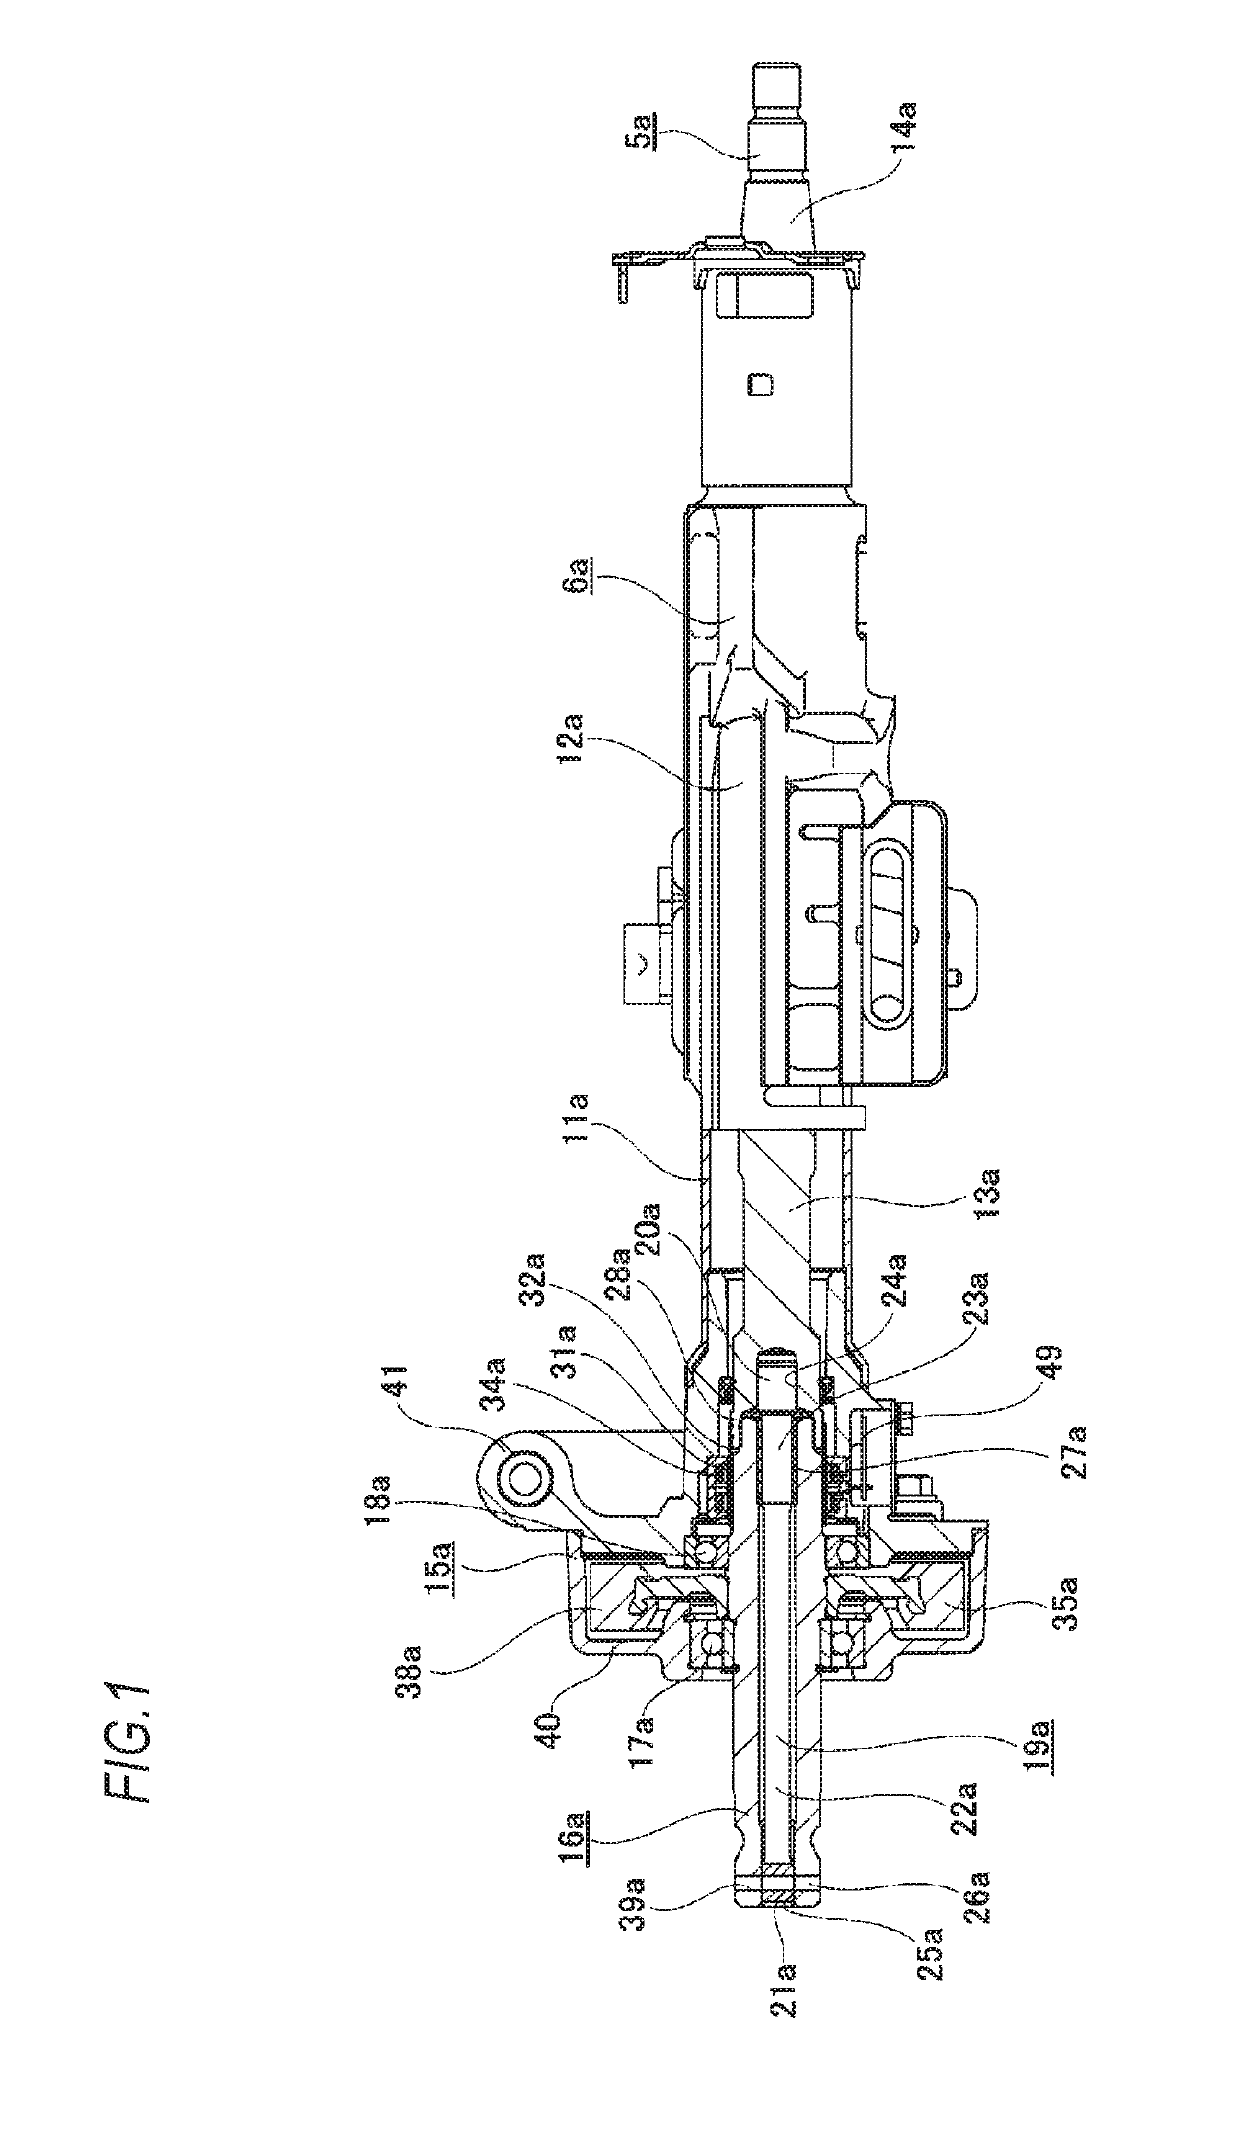 Electric power steering device and method for assembling the same